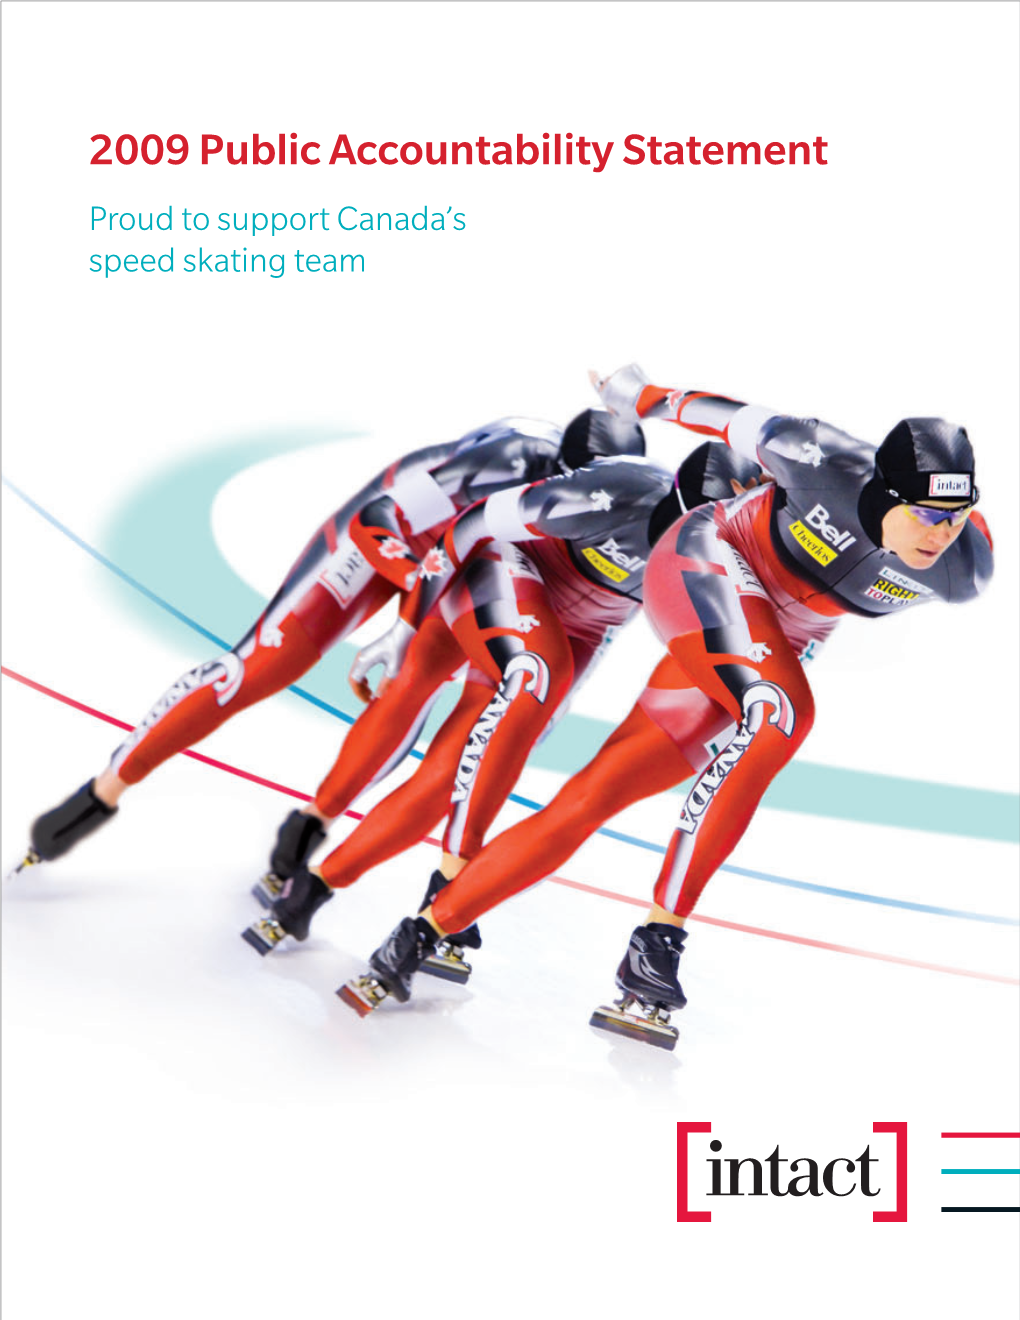 2009 Public Accountability Statement Proud to Support Canada’S Speed Skating Team